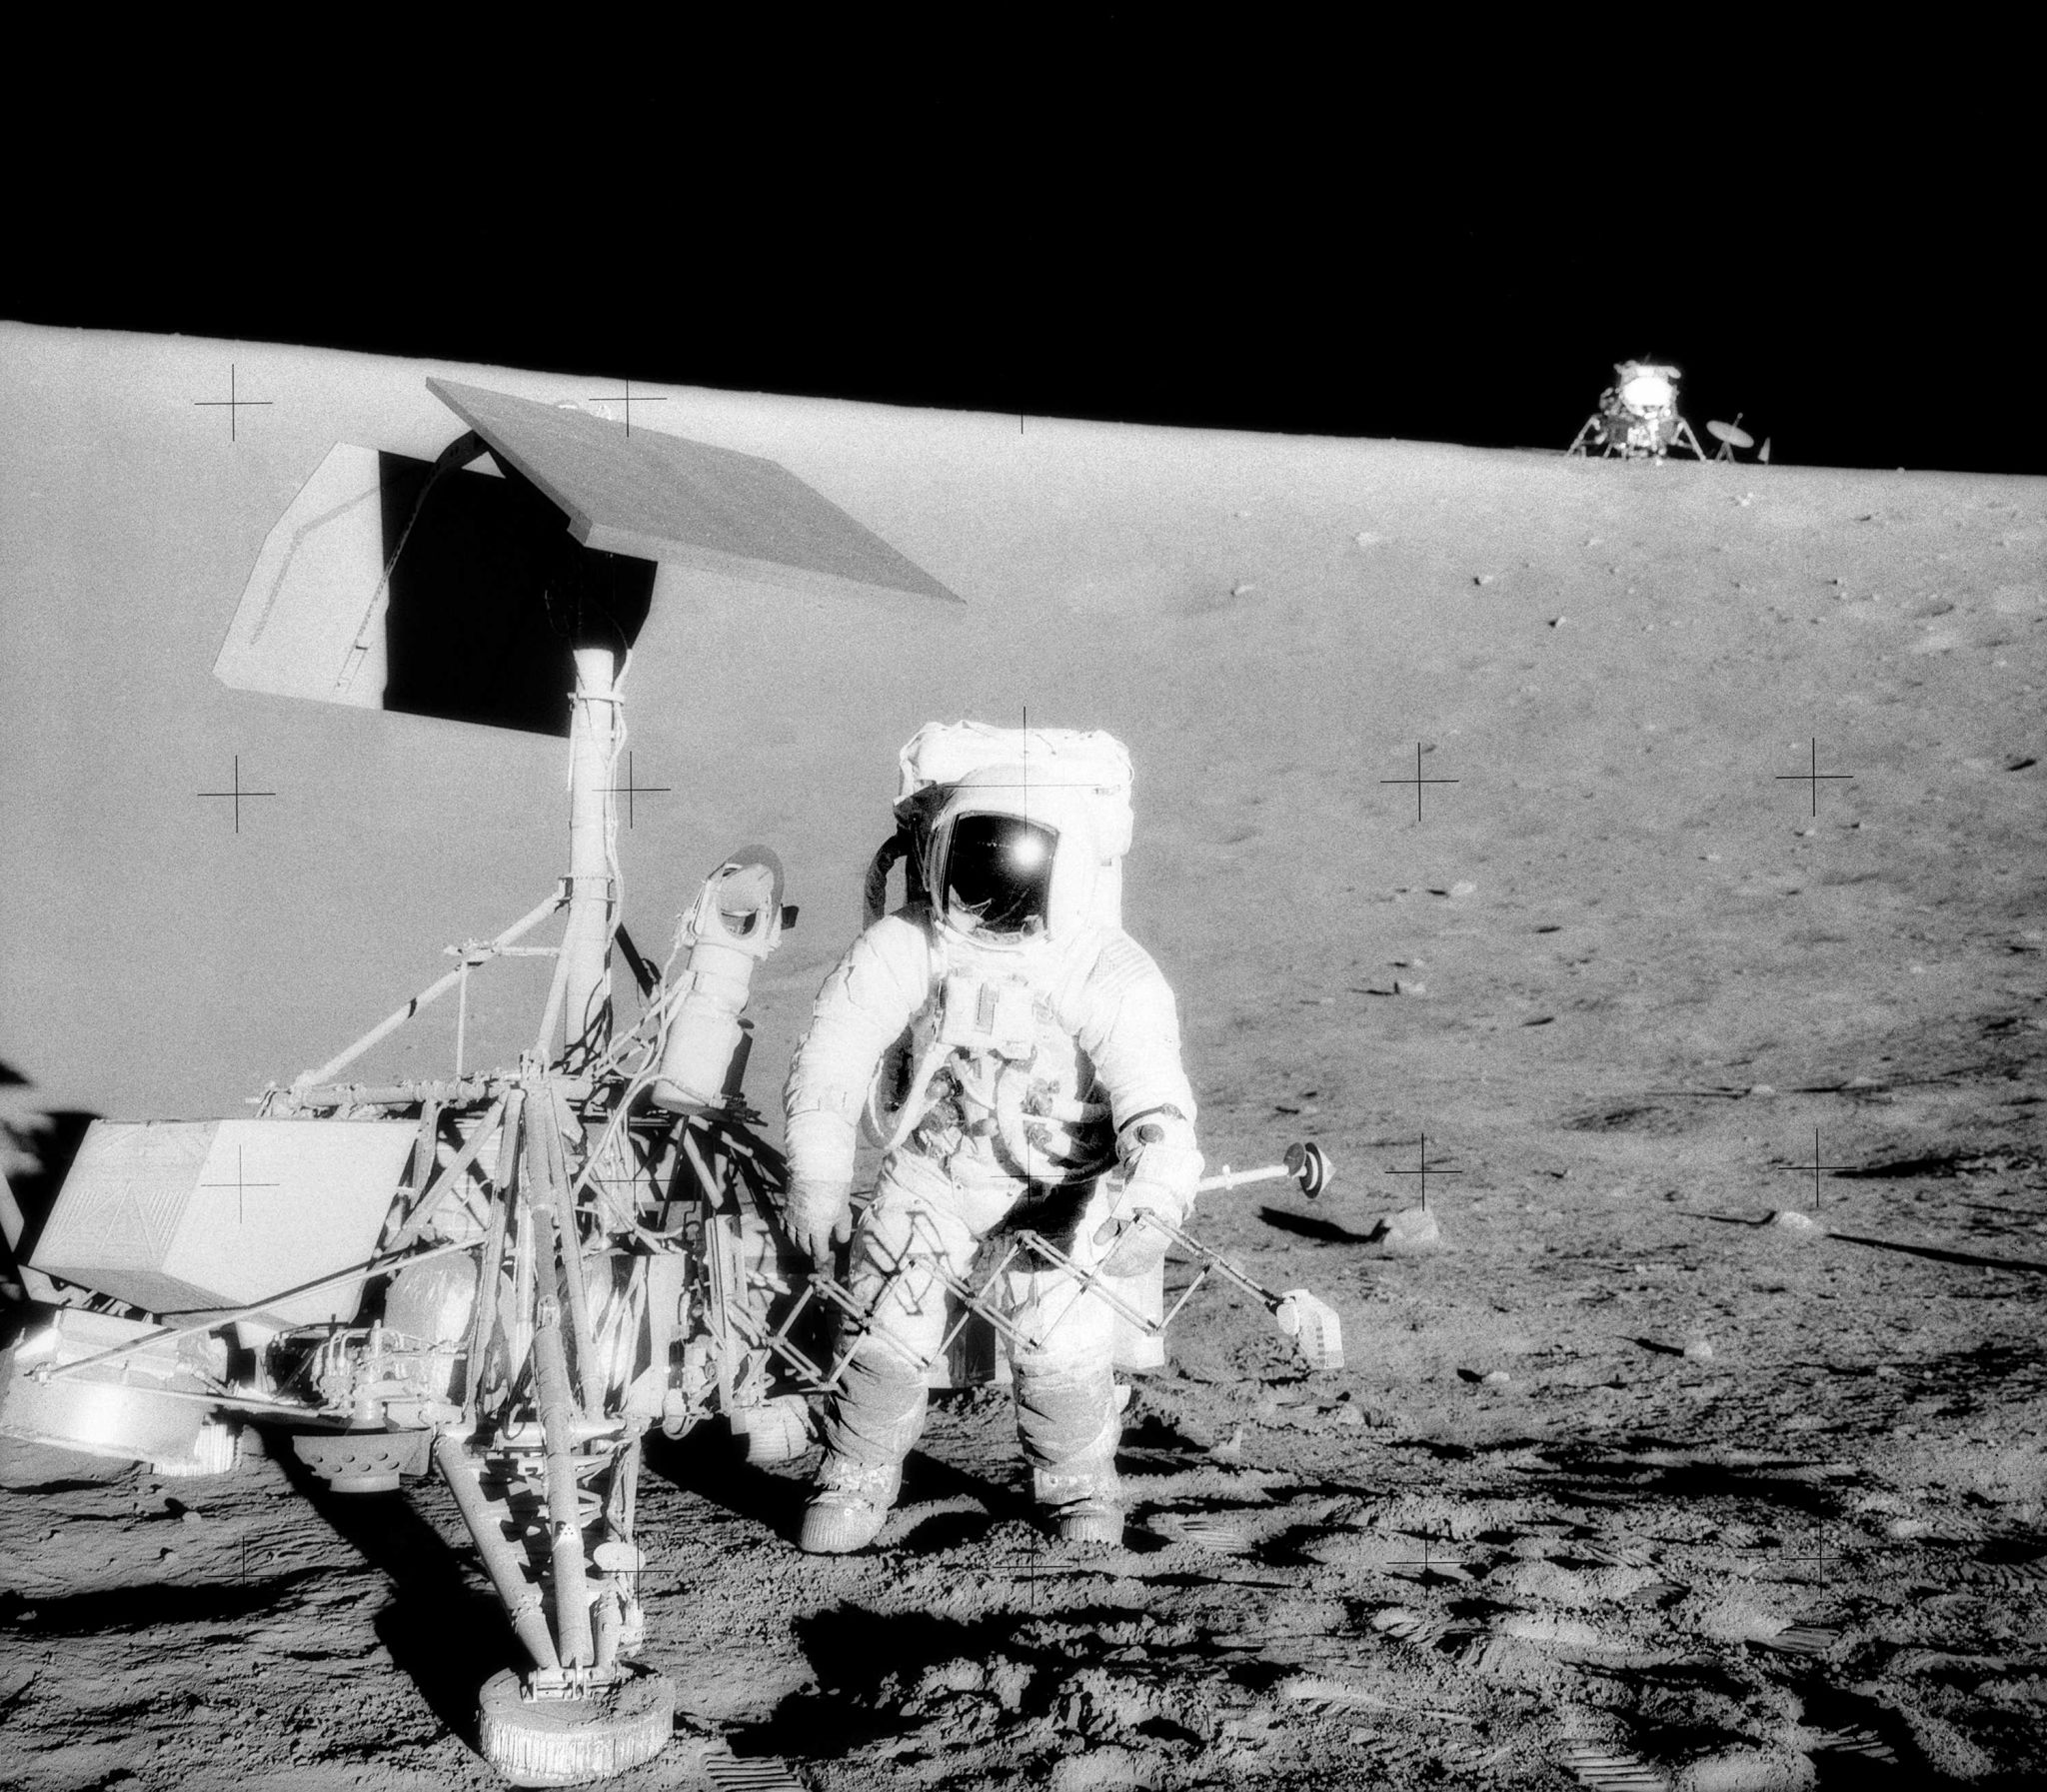 Apollo 13 Movie Worksheet Answer Key together with Moon Landing Conspiracy theories